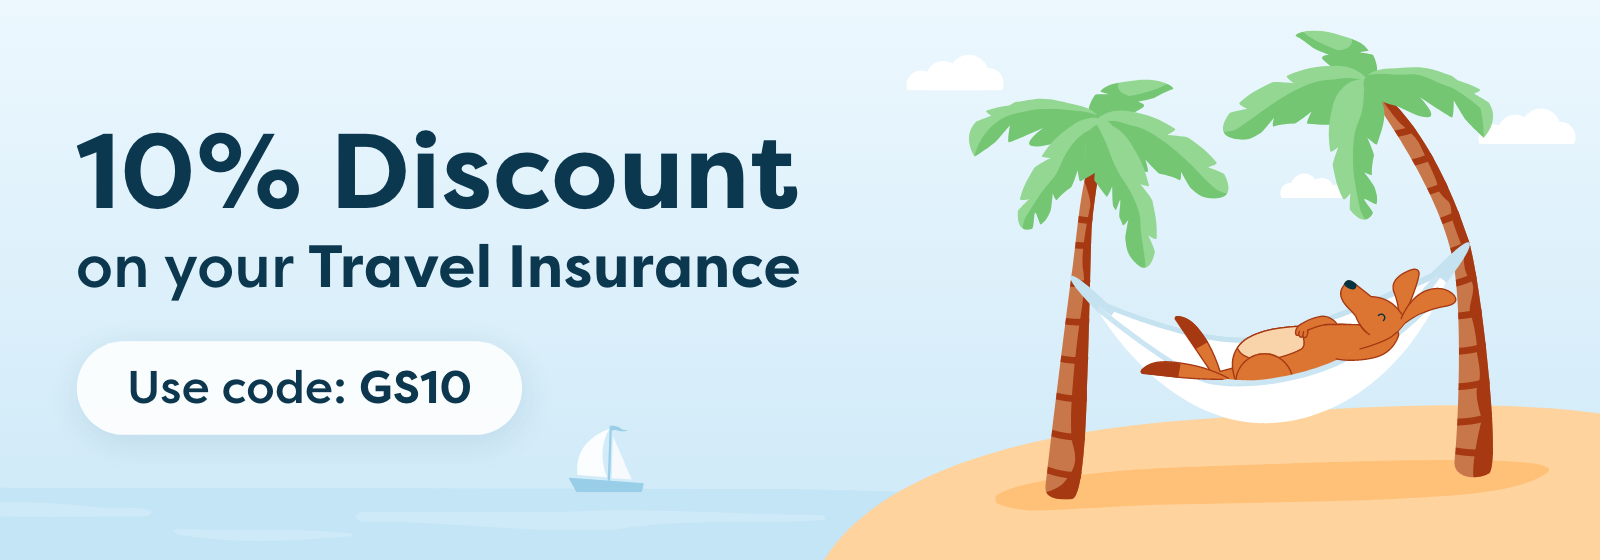 For 10% off Travel Insurance. Use Code: GS10